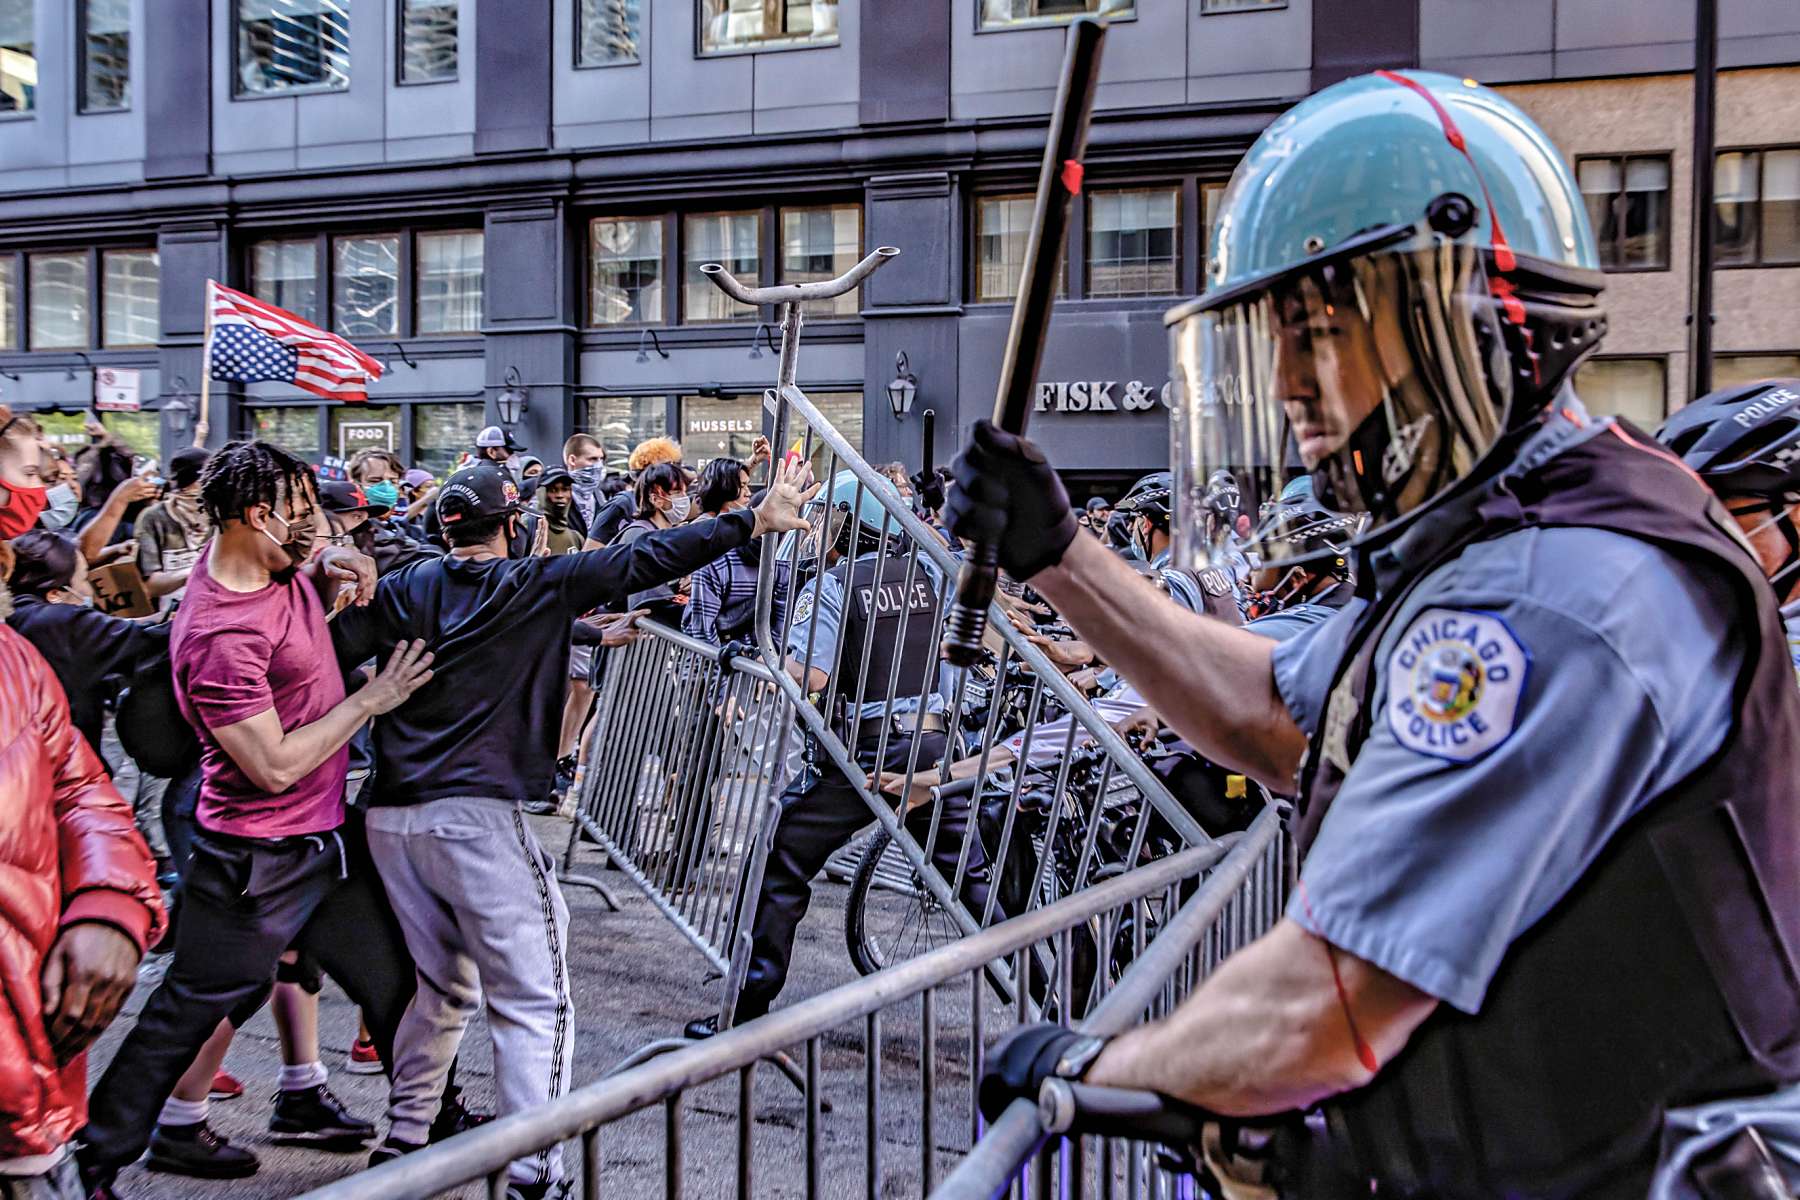 Police try to keep order as violent protestors encroach them in the streets of Chicago